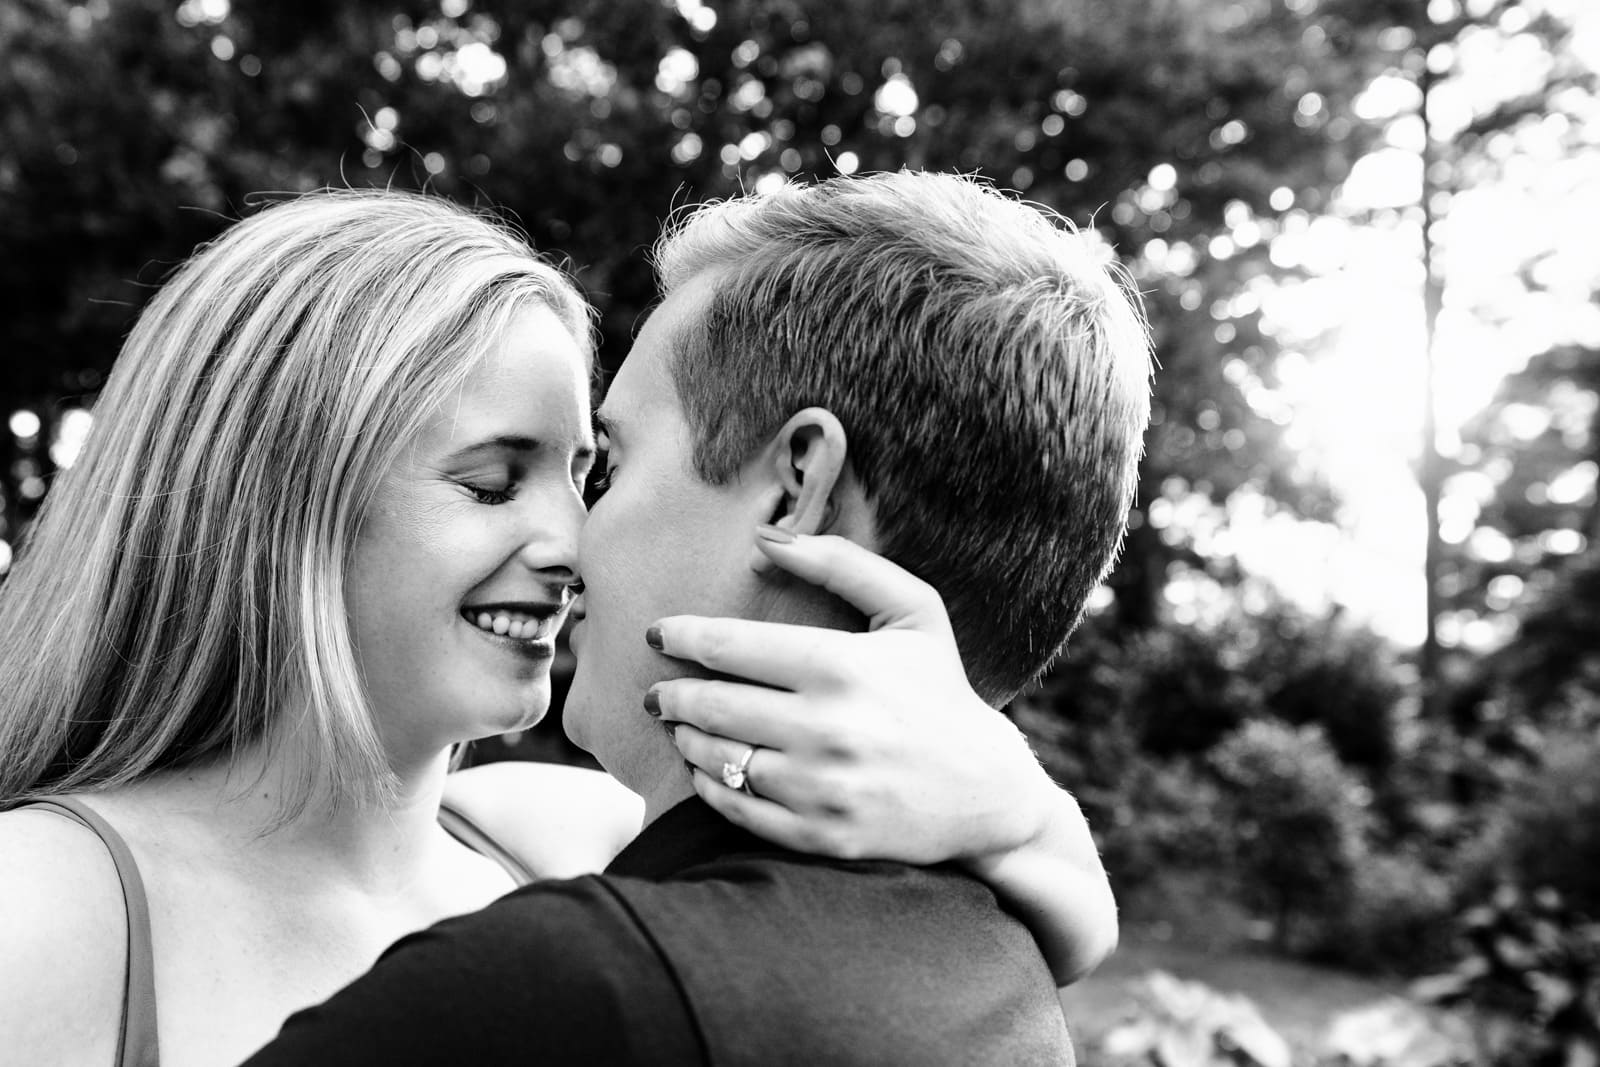 engaged couple embraces in a black and white photo creative engagement photography at Killjoy Cocktail bar in Raleigh, NC | photos by Kivus & Camera